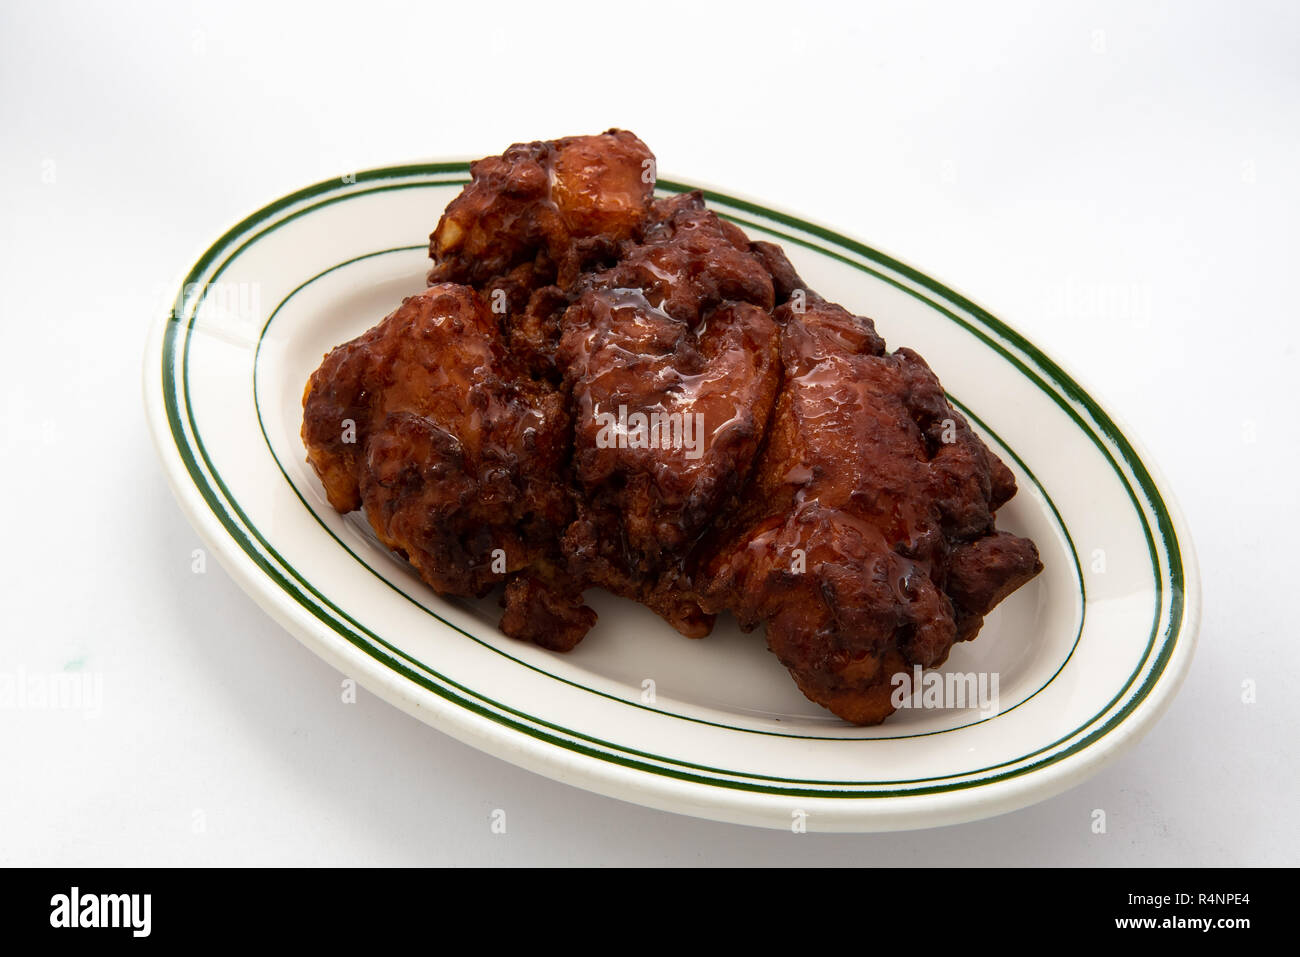 A glazed apple fritter on a white plate with a white background. Stock Photo